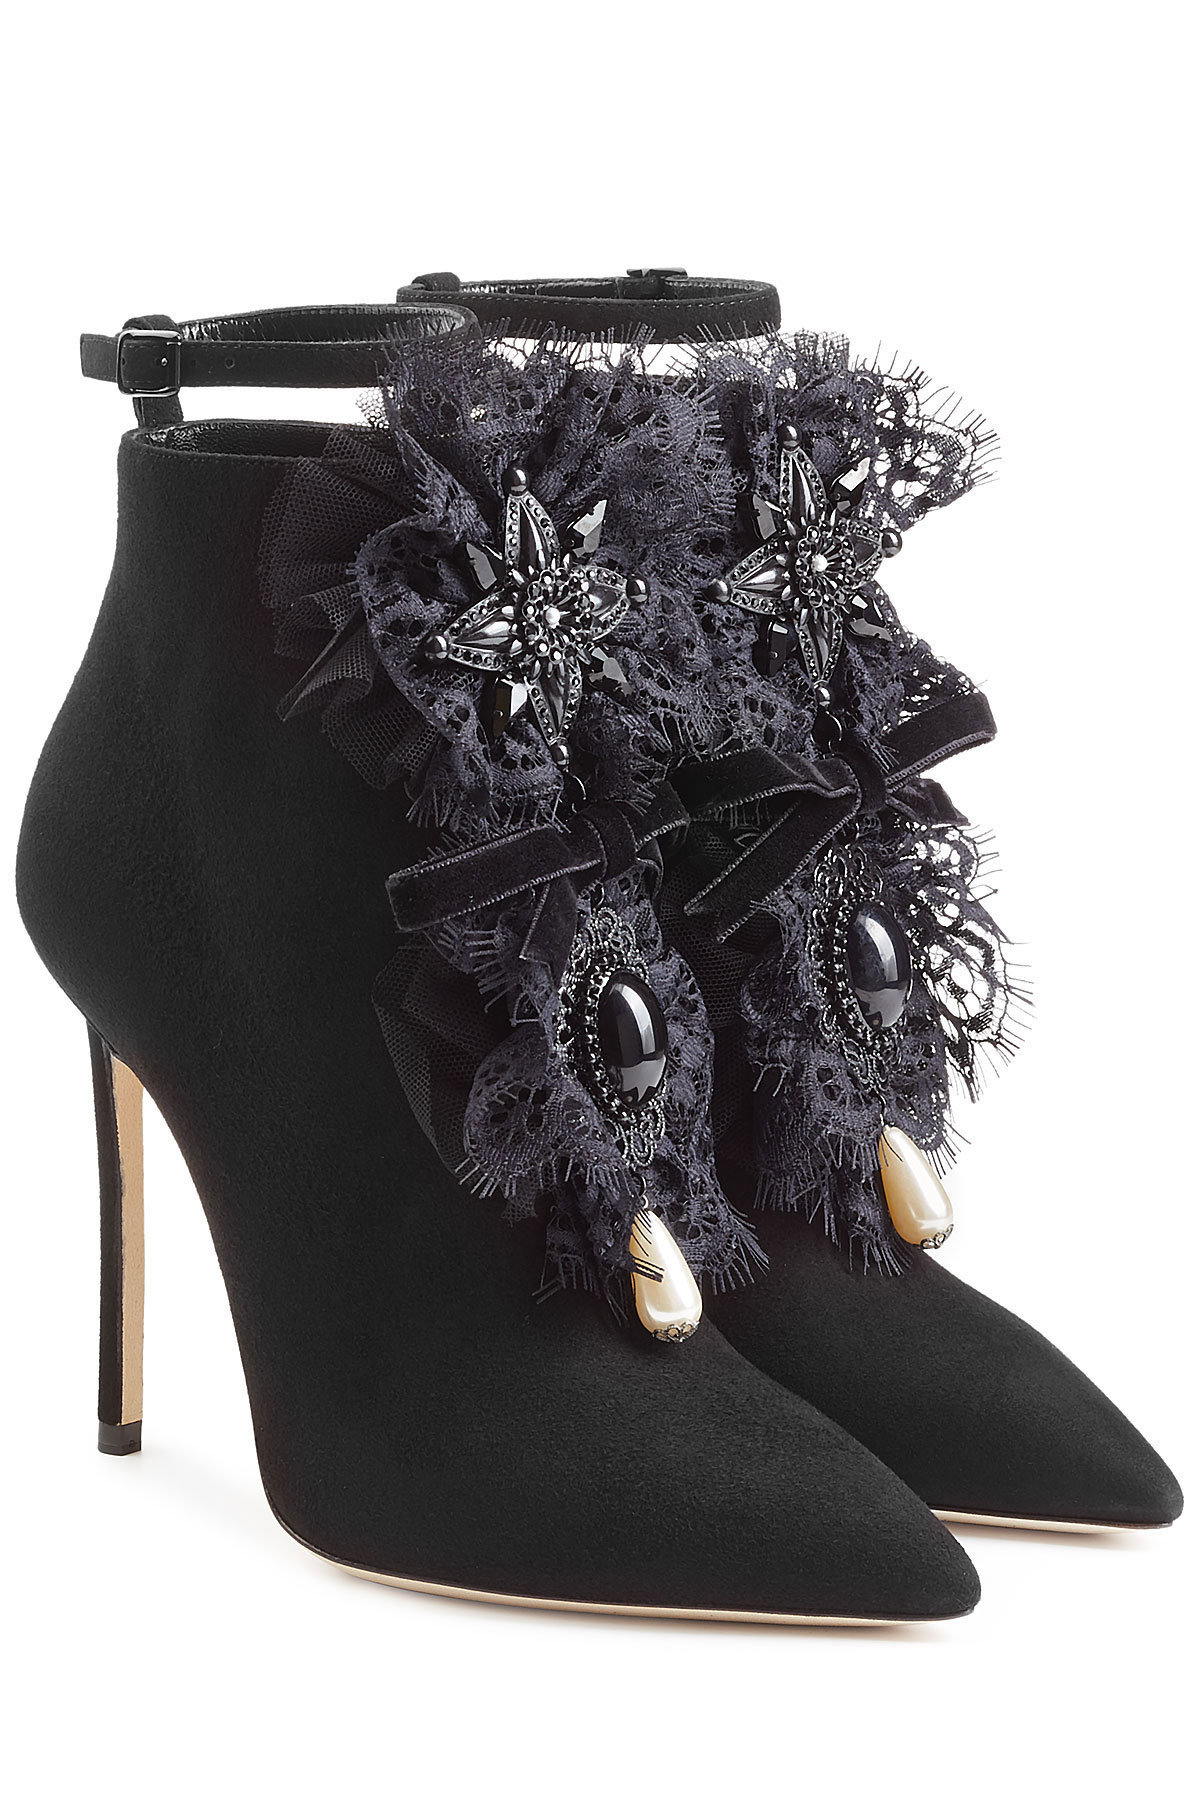 Dsquared2 - Suede Ankle Boots with Contrast Leather Straps